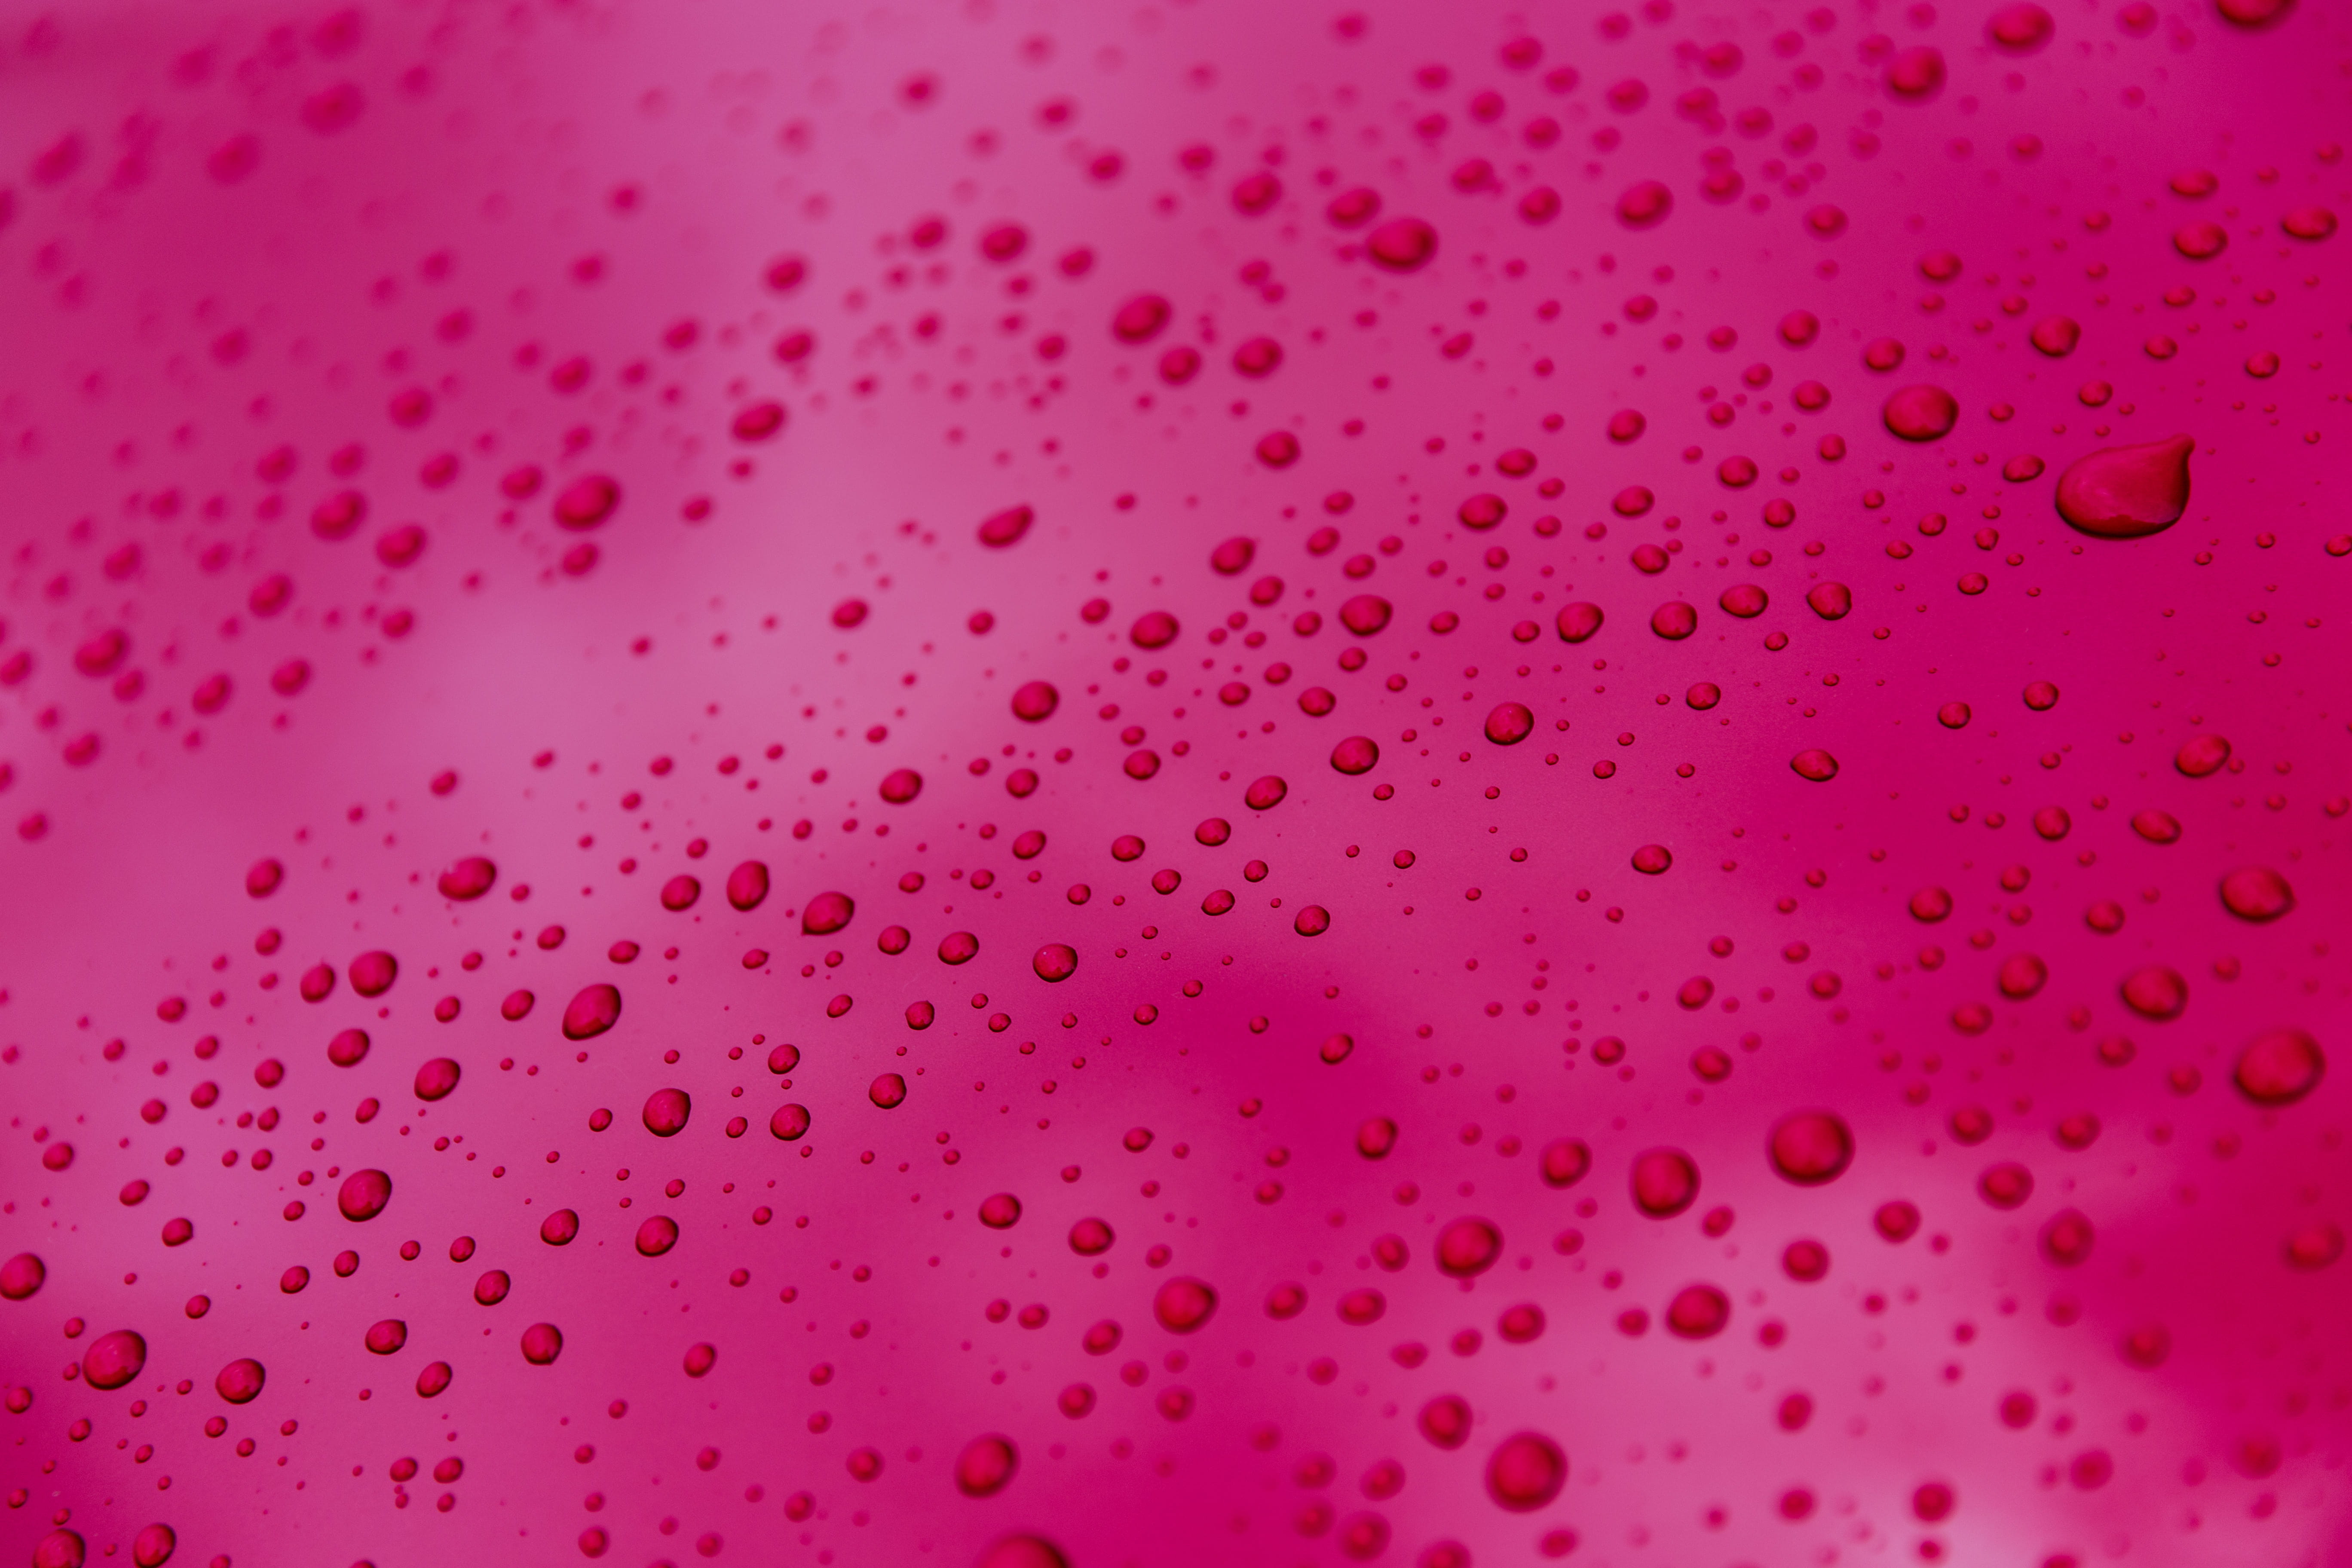 Close-up shot of fresh rain drops on a metal texture, this image was captured with a Canon 6D DSLR